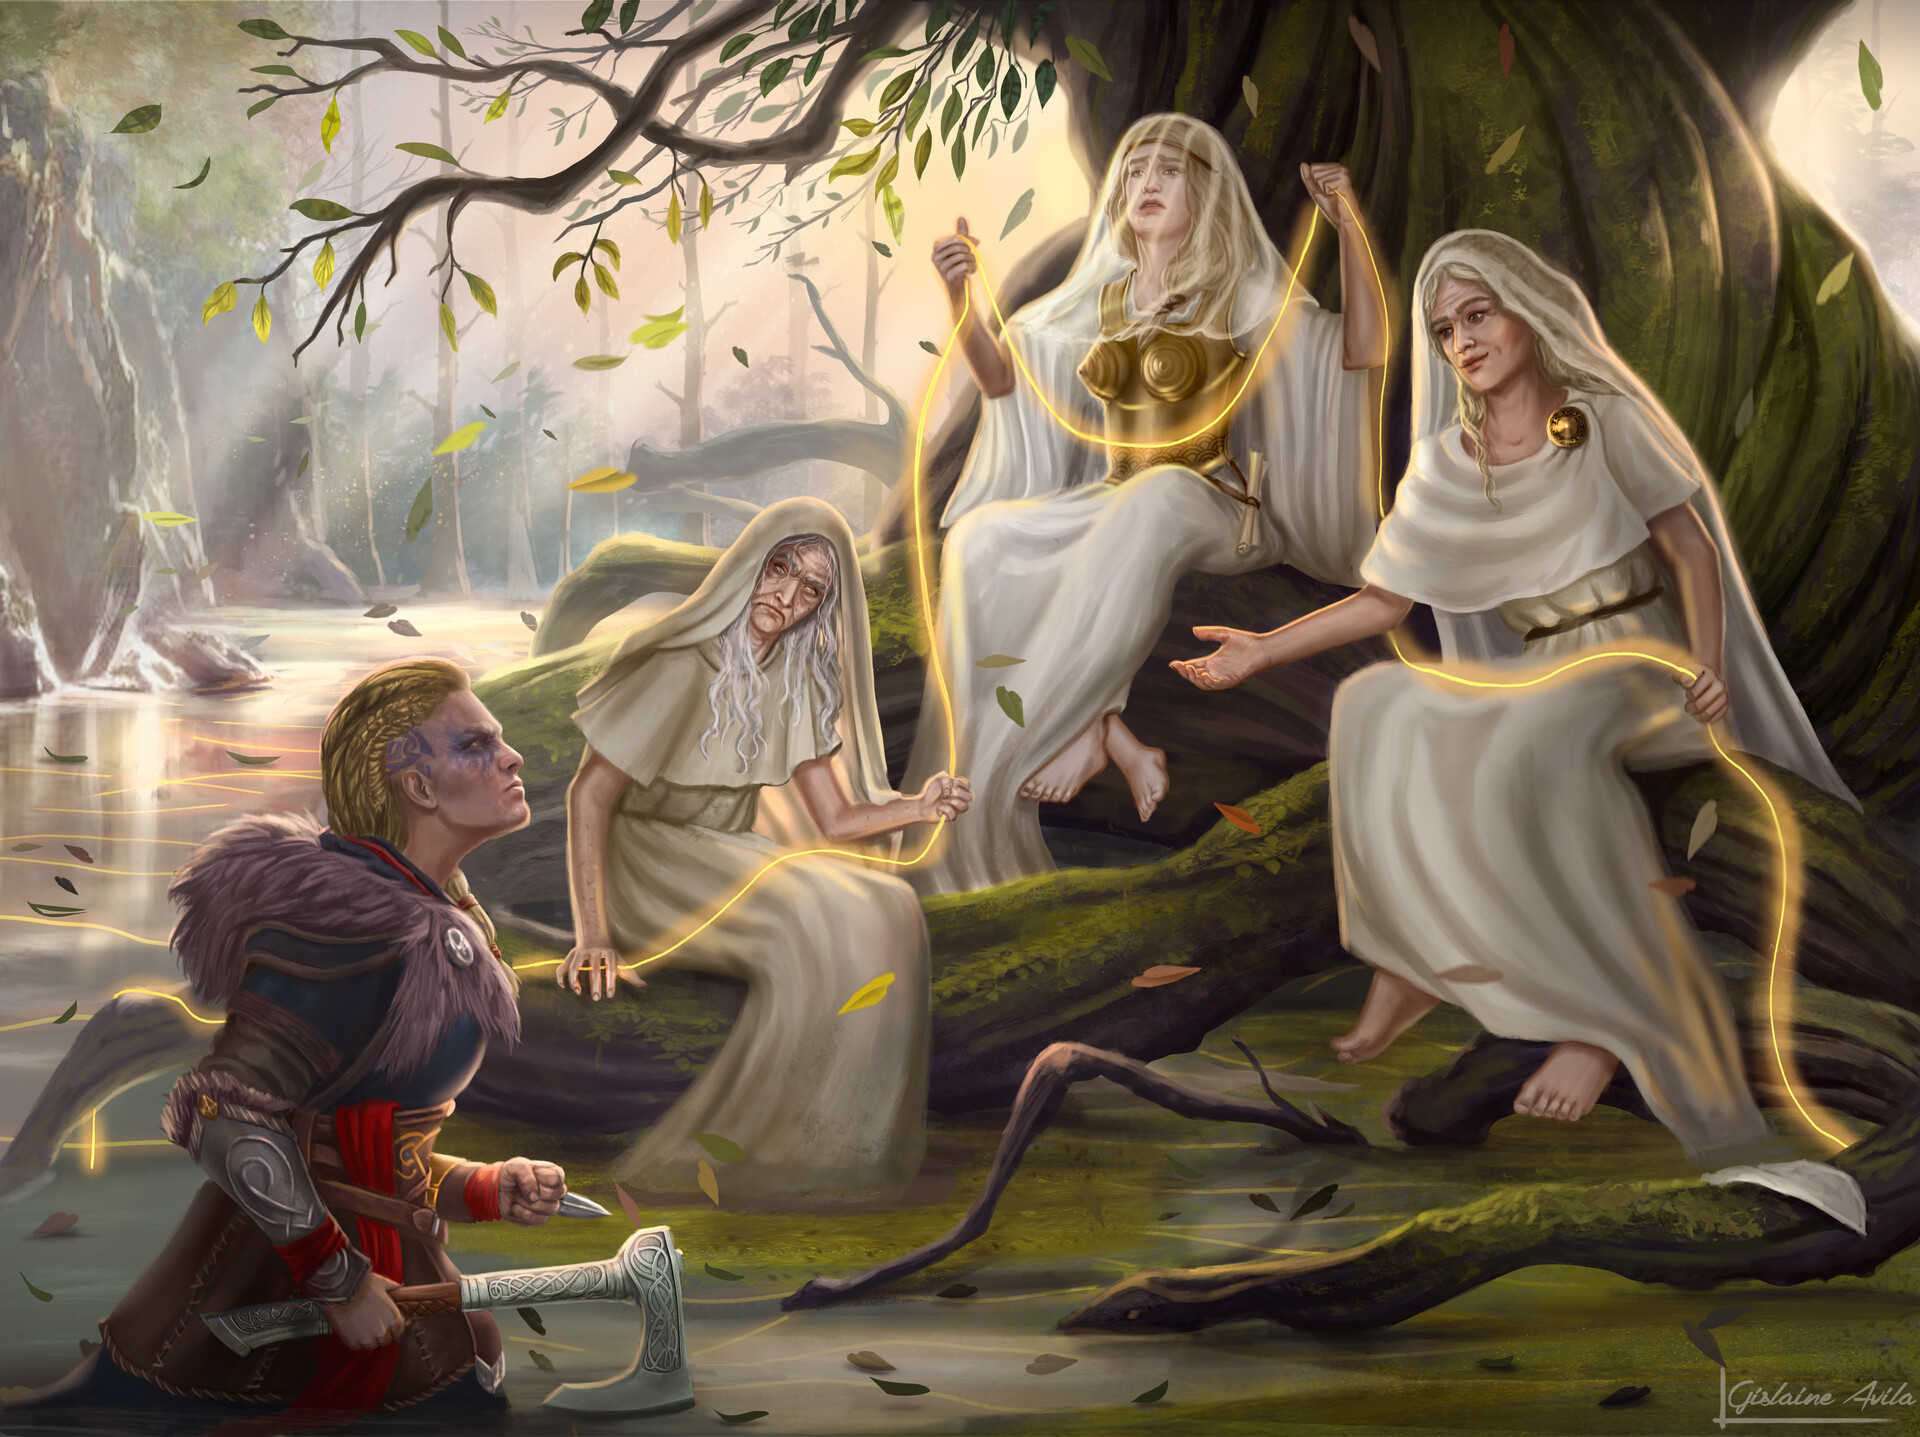 I describe in it a meeting between Eivor and the Norns, ancient goddesses o...